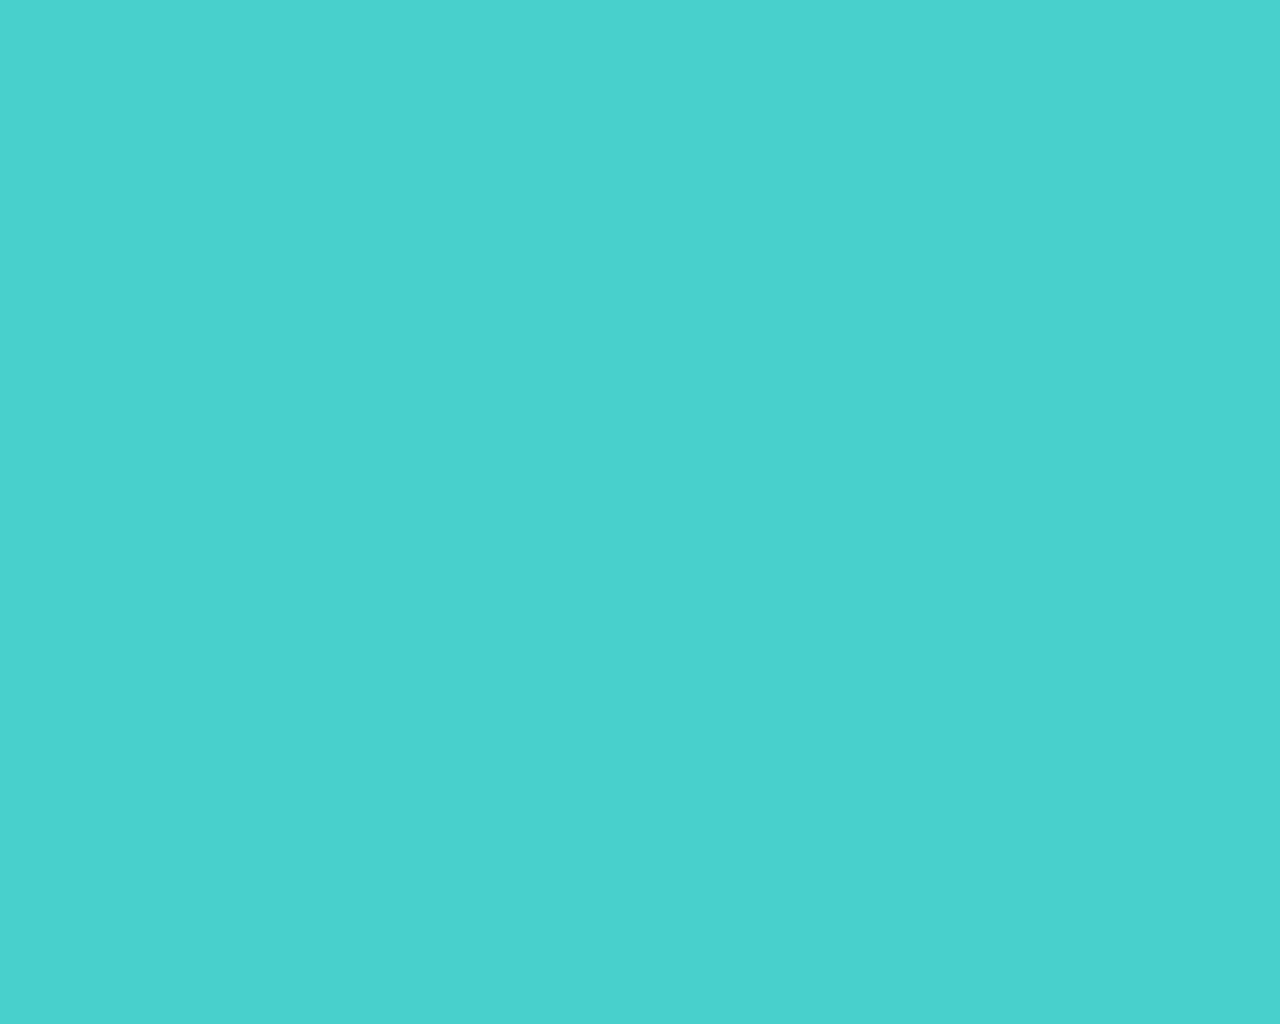 1280x1024 Medium Turquoise Solid Color Background